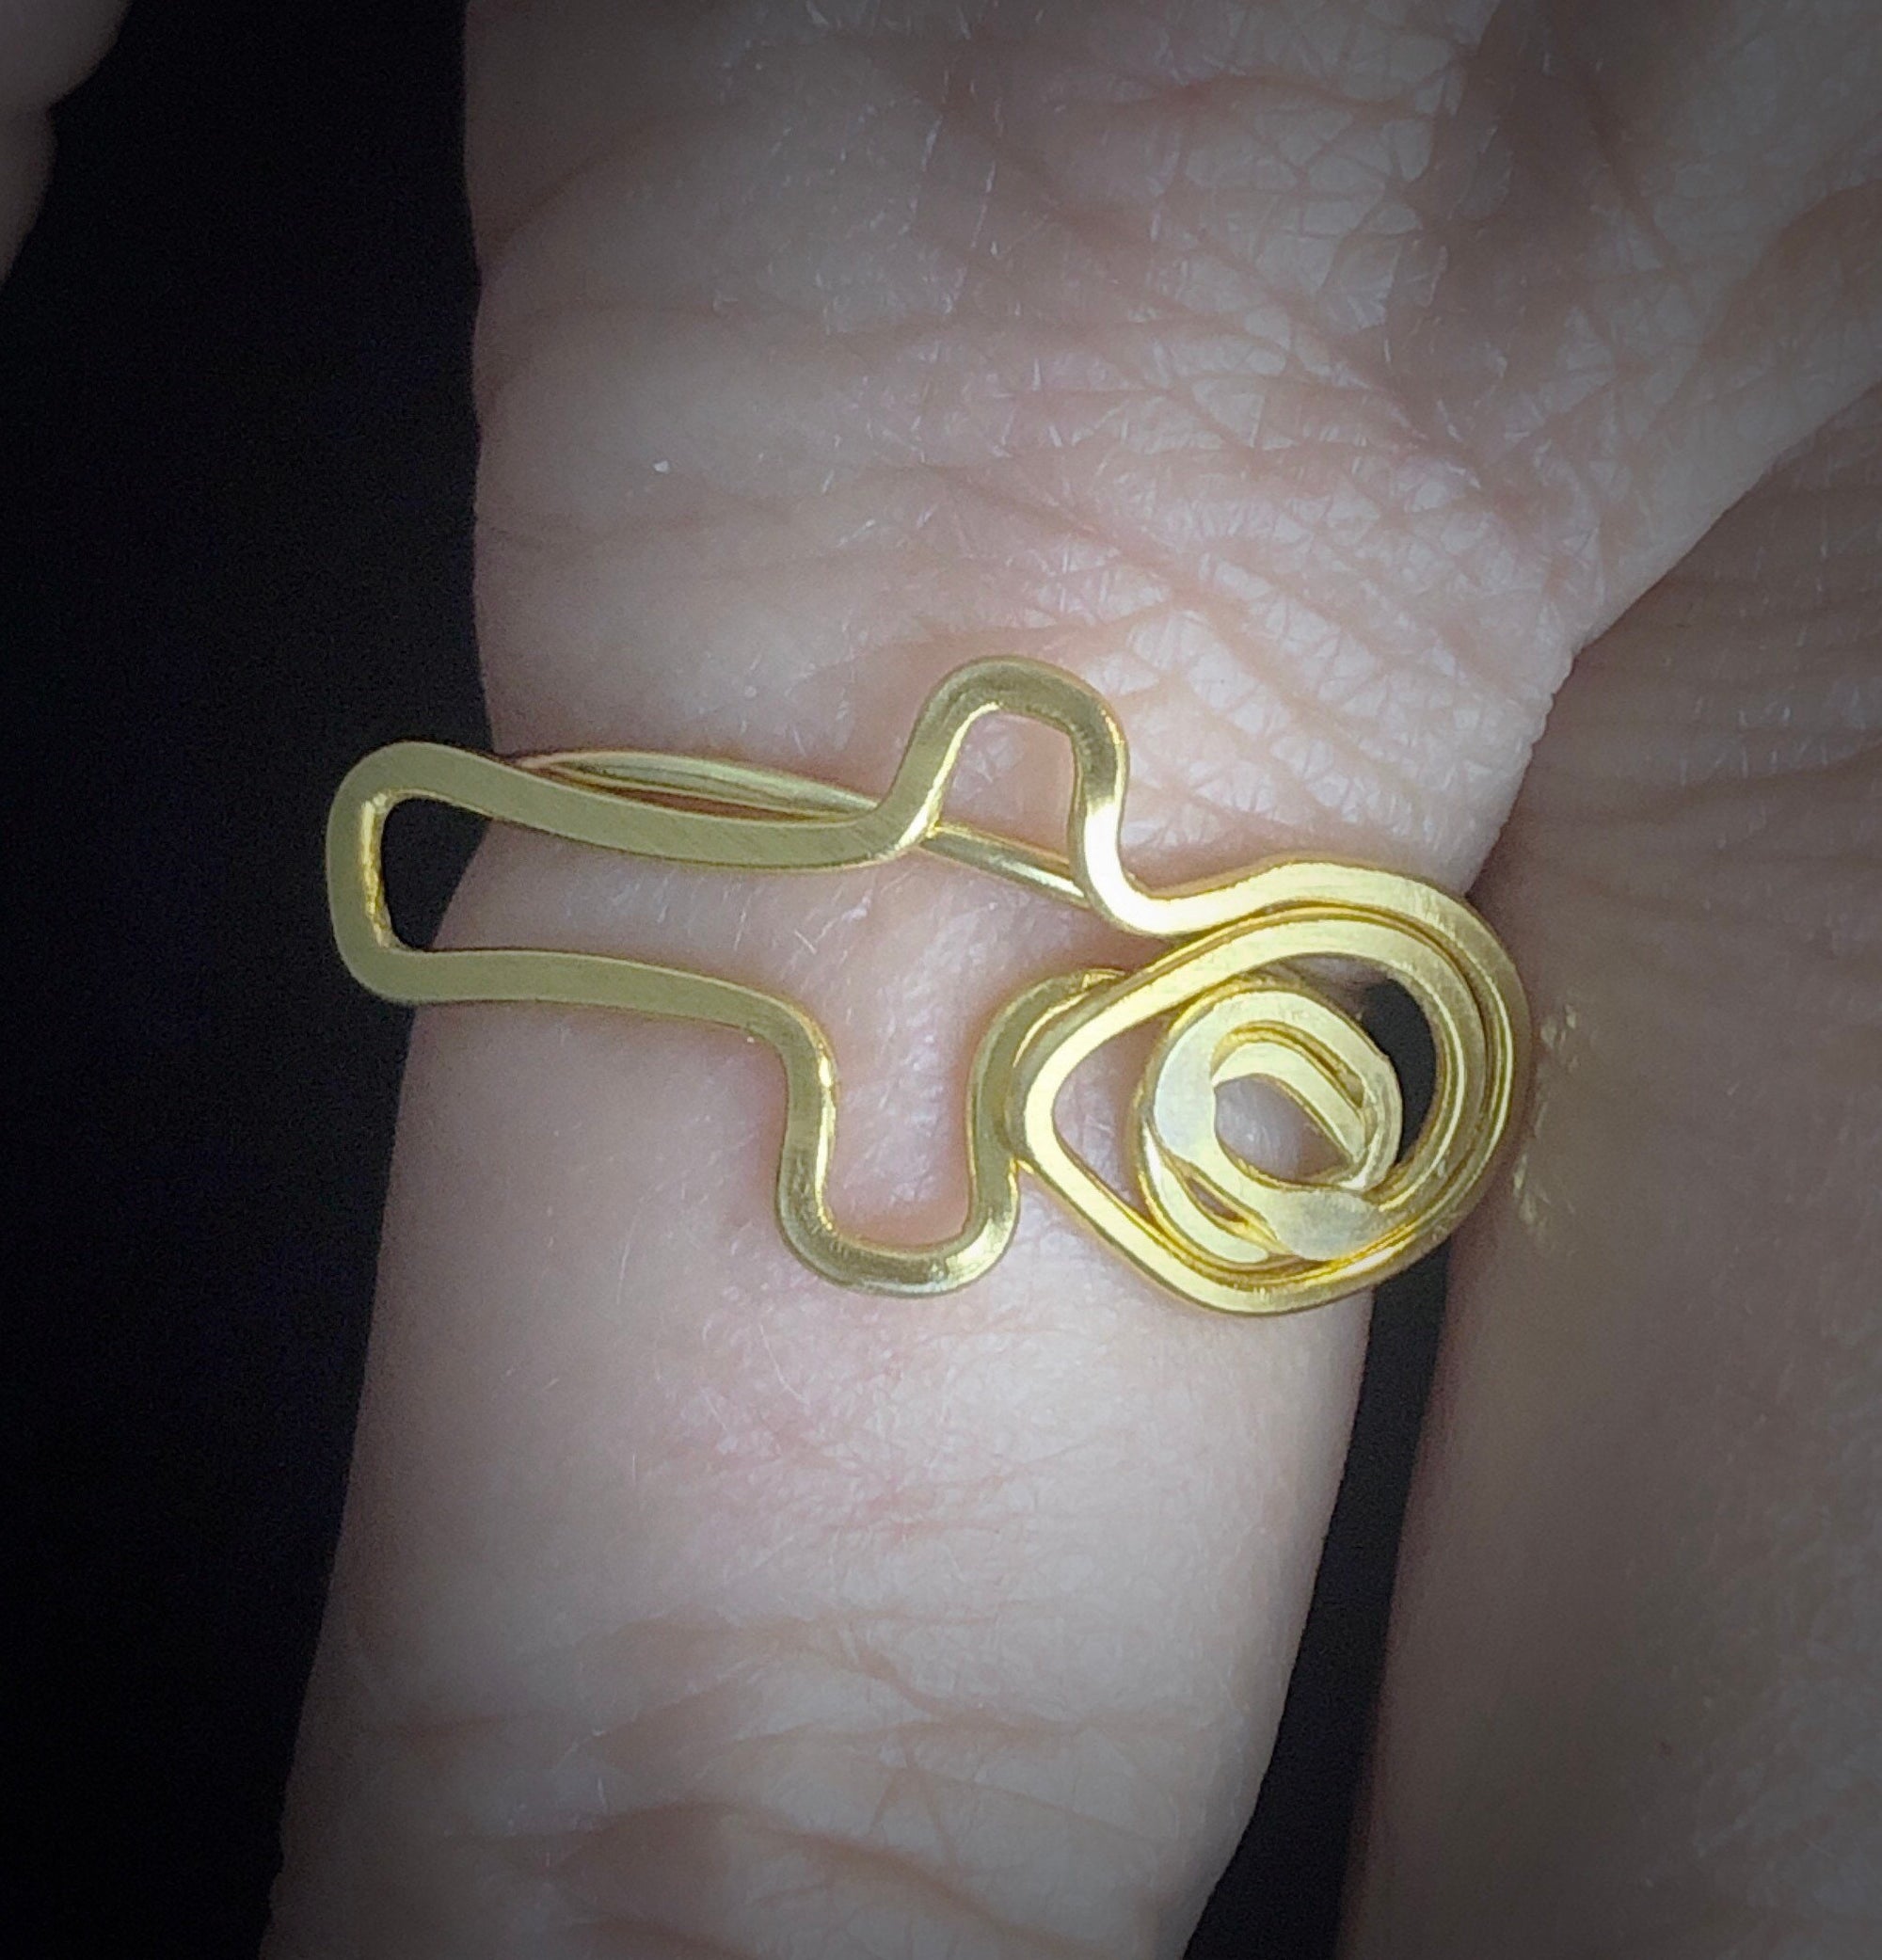 Adjustable ancient Egypt Egyptian jewelry • Ankh Egypt pagan ring • Key of life cross ring • Egyptian symbol of life pagan jewelry